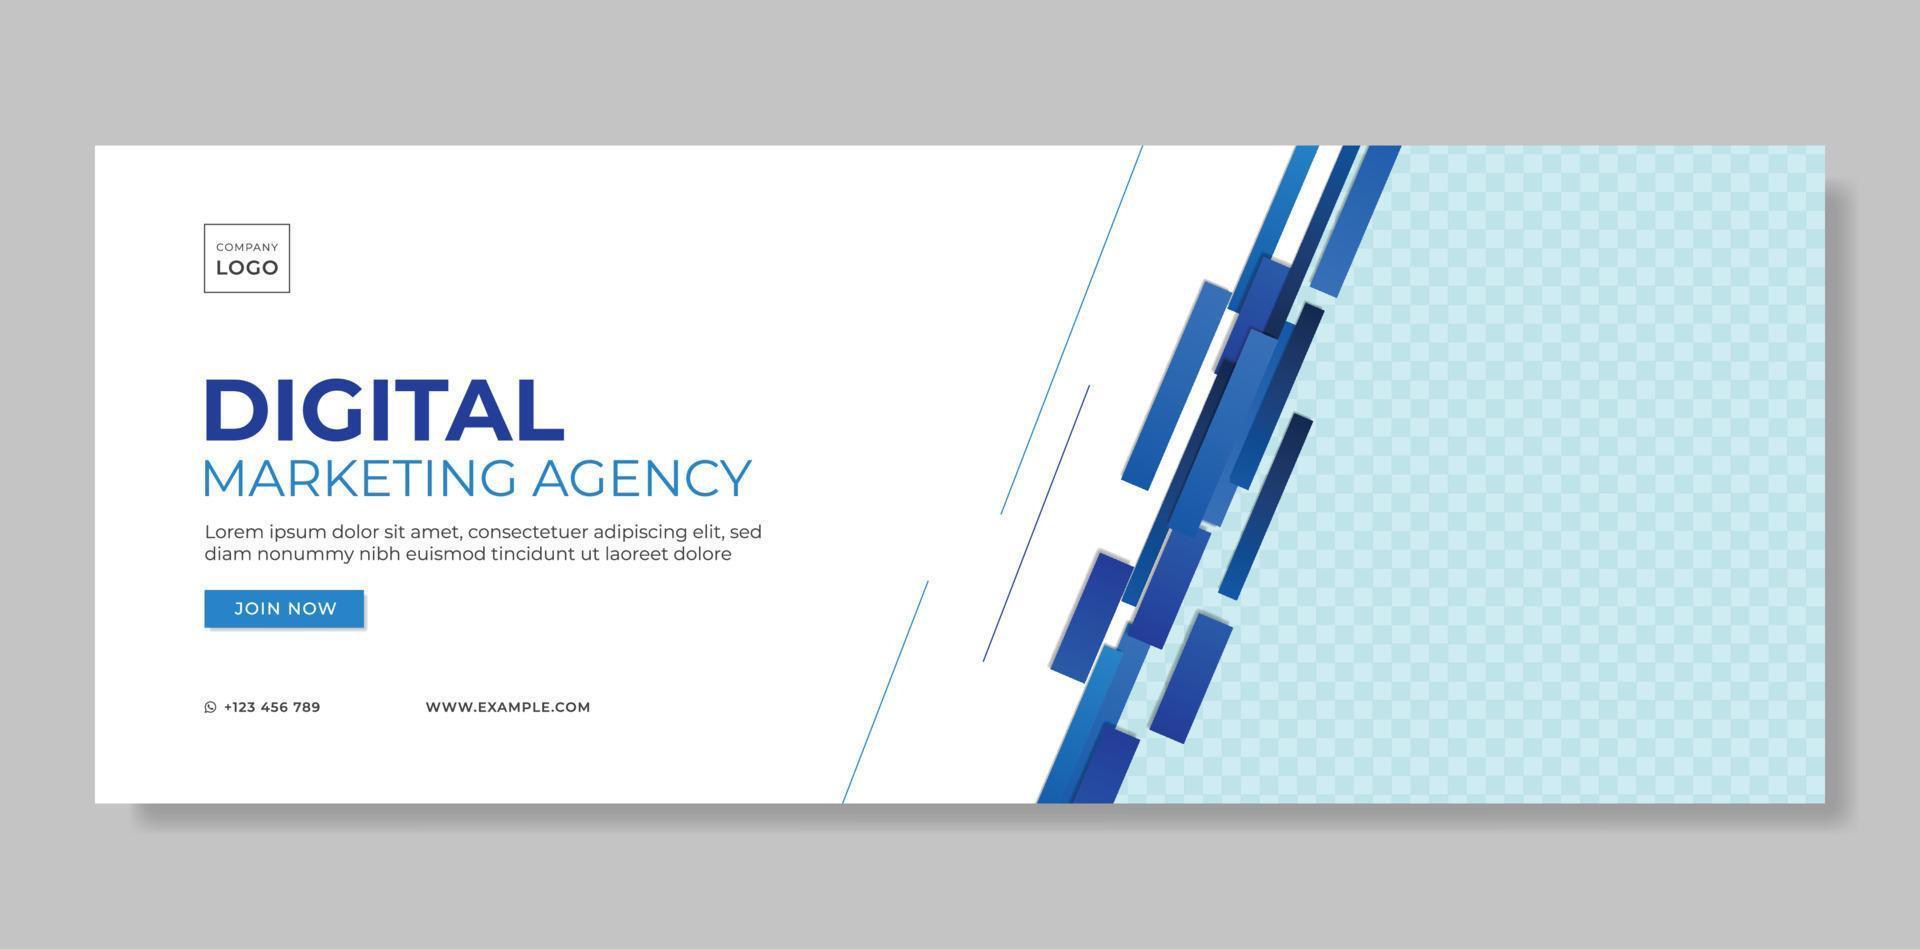 Digital Marketing Business Horizontal Banner with Space for Photo. Corporate Web Banner Template With Geometric Decoration for Social Media Post. Vector Illustration